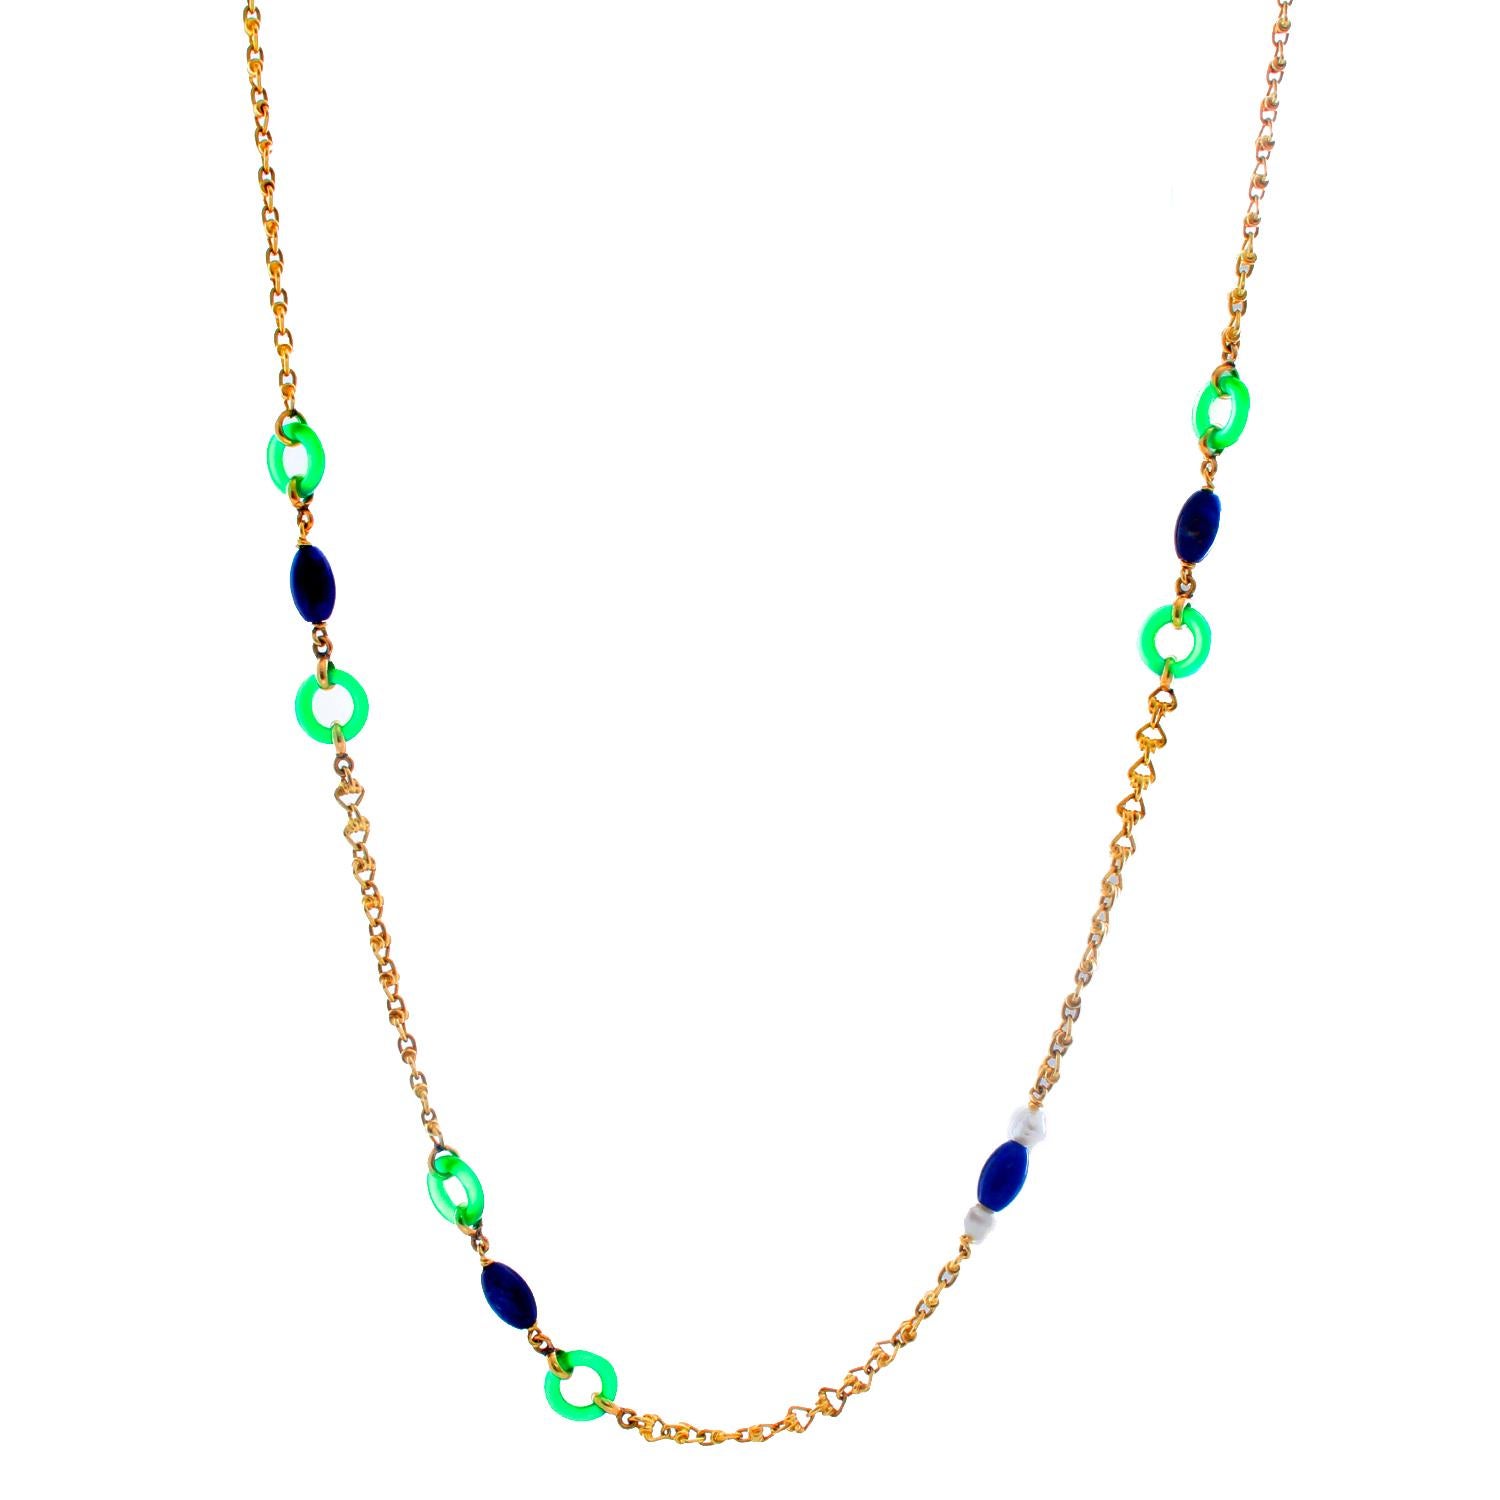 18K Yellow Gold Lapis Lazuli, Pearl and Green Stone Necklace  - 18K Yellow gold 24 inch necklace. Hoop green stone, elongated Lapis Lazuli and a peal bead. Total weight 75.3 grams. Perfect as a double over necklace. 